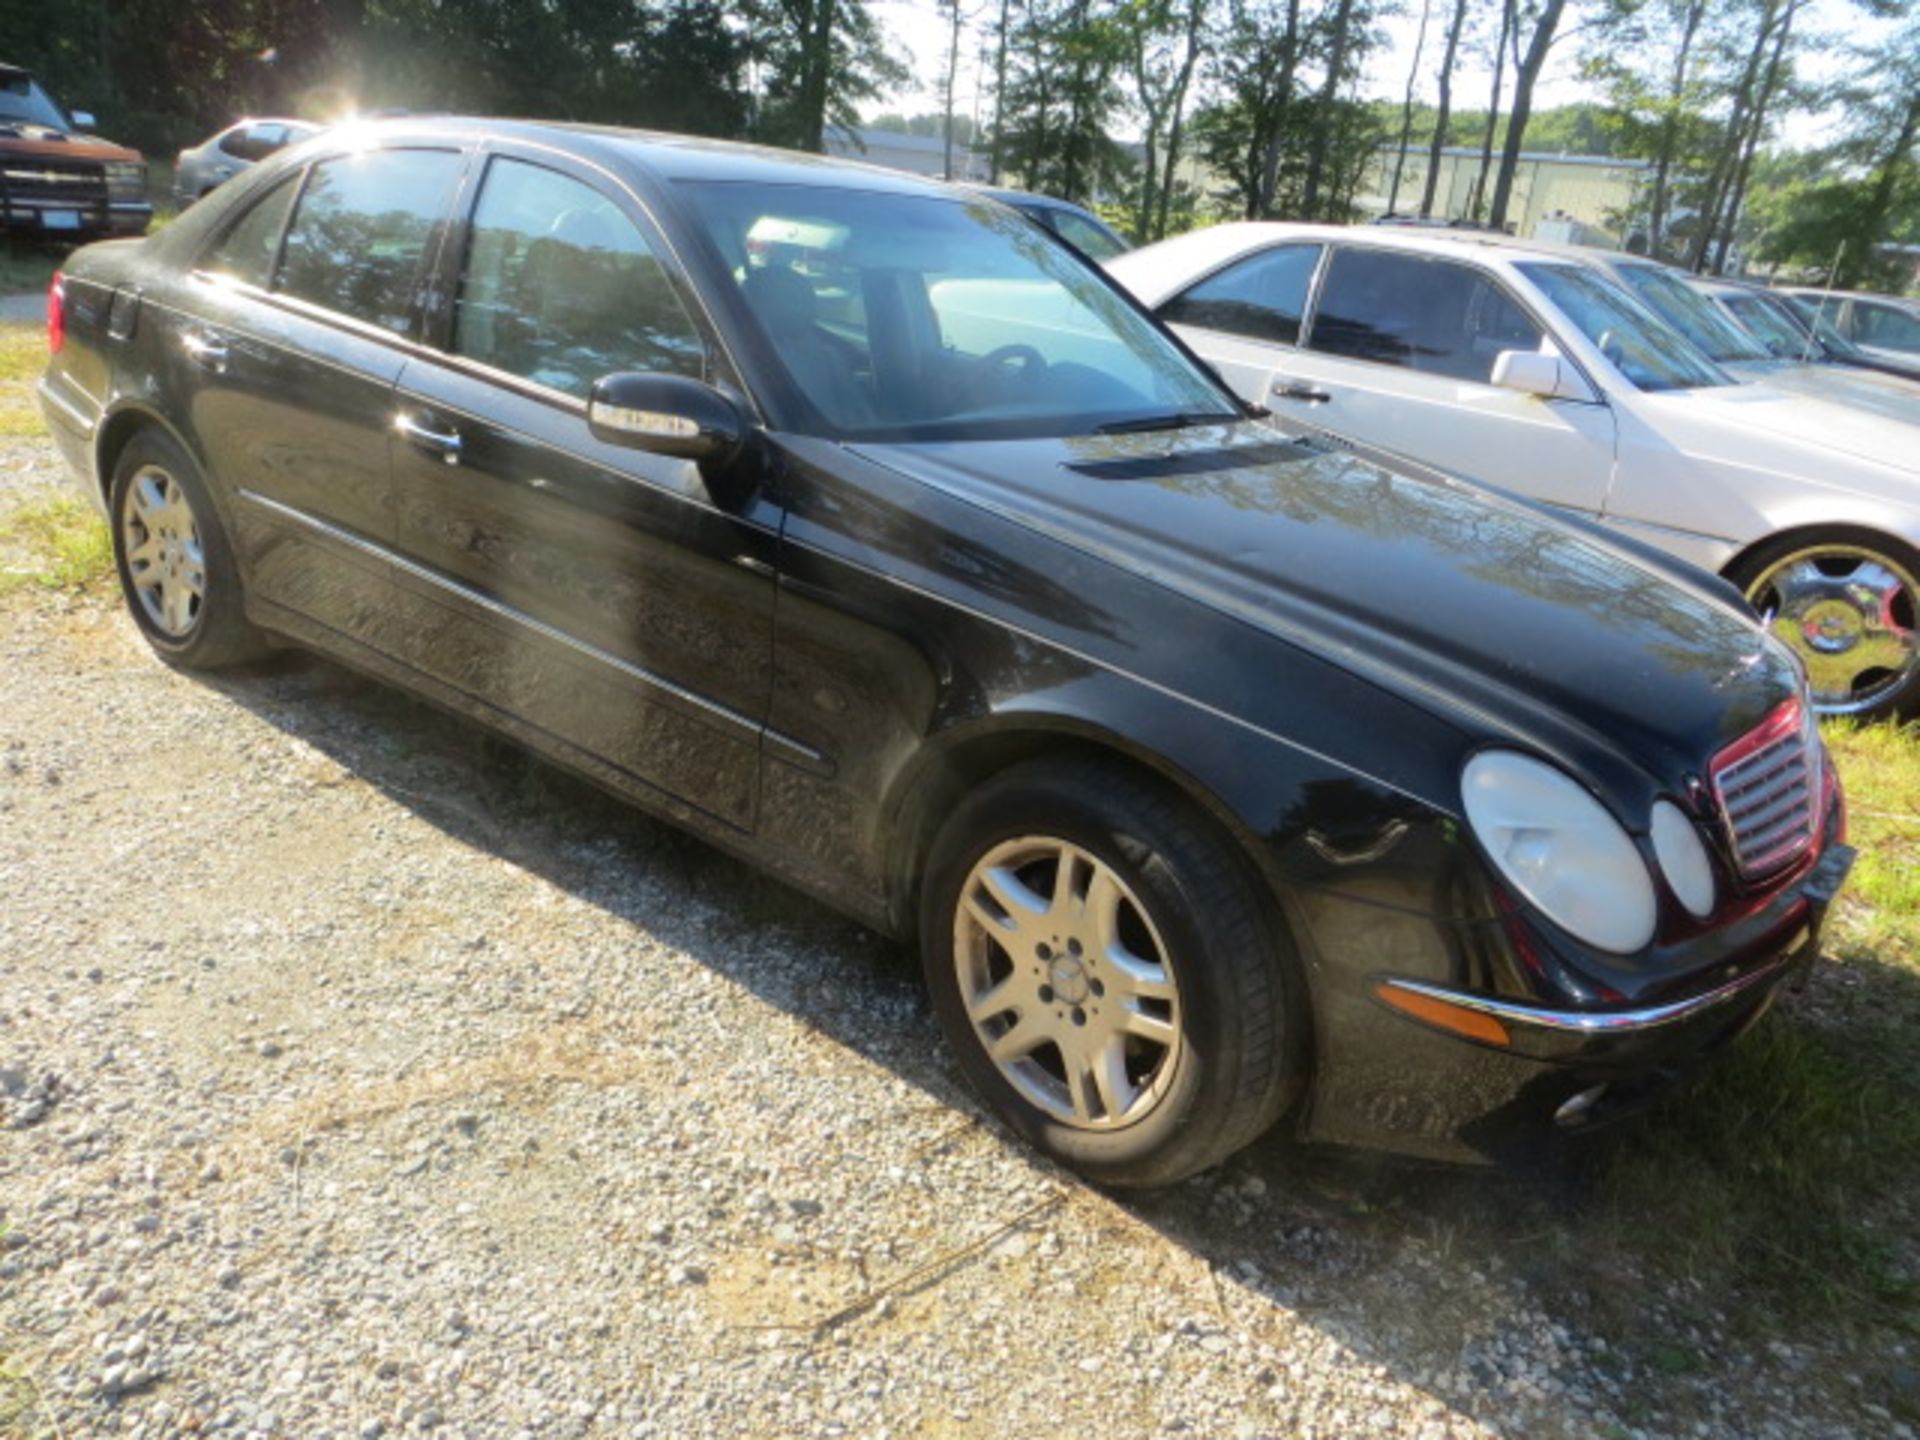 2003 MERCEDES E320 148000 MILES,VIN WDBUF65J43A159928, SOLD WITH GOOD TRANSFERABLE TITLE, ALL VEHICL - Image 2 of 4